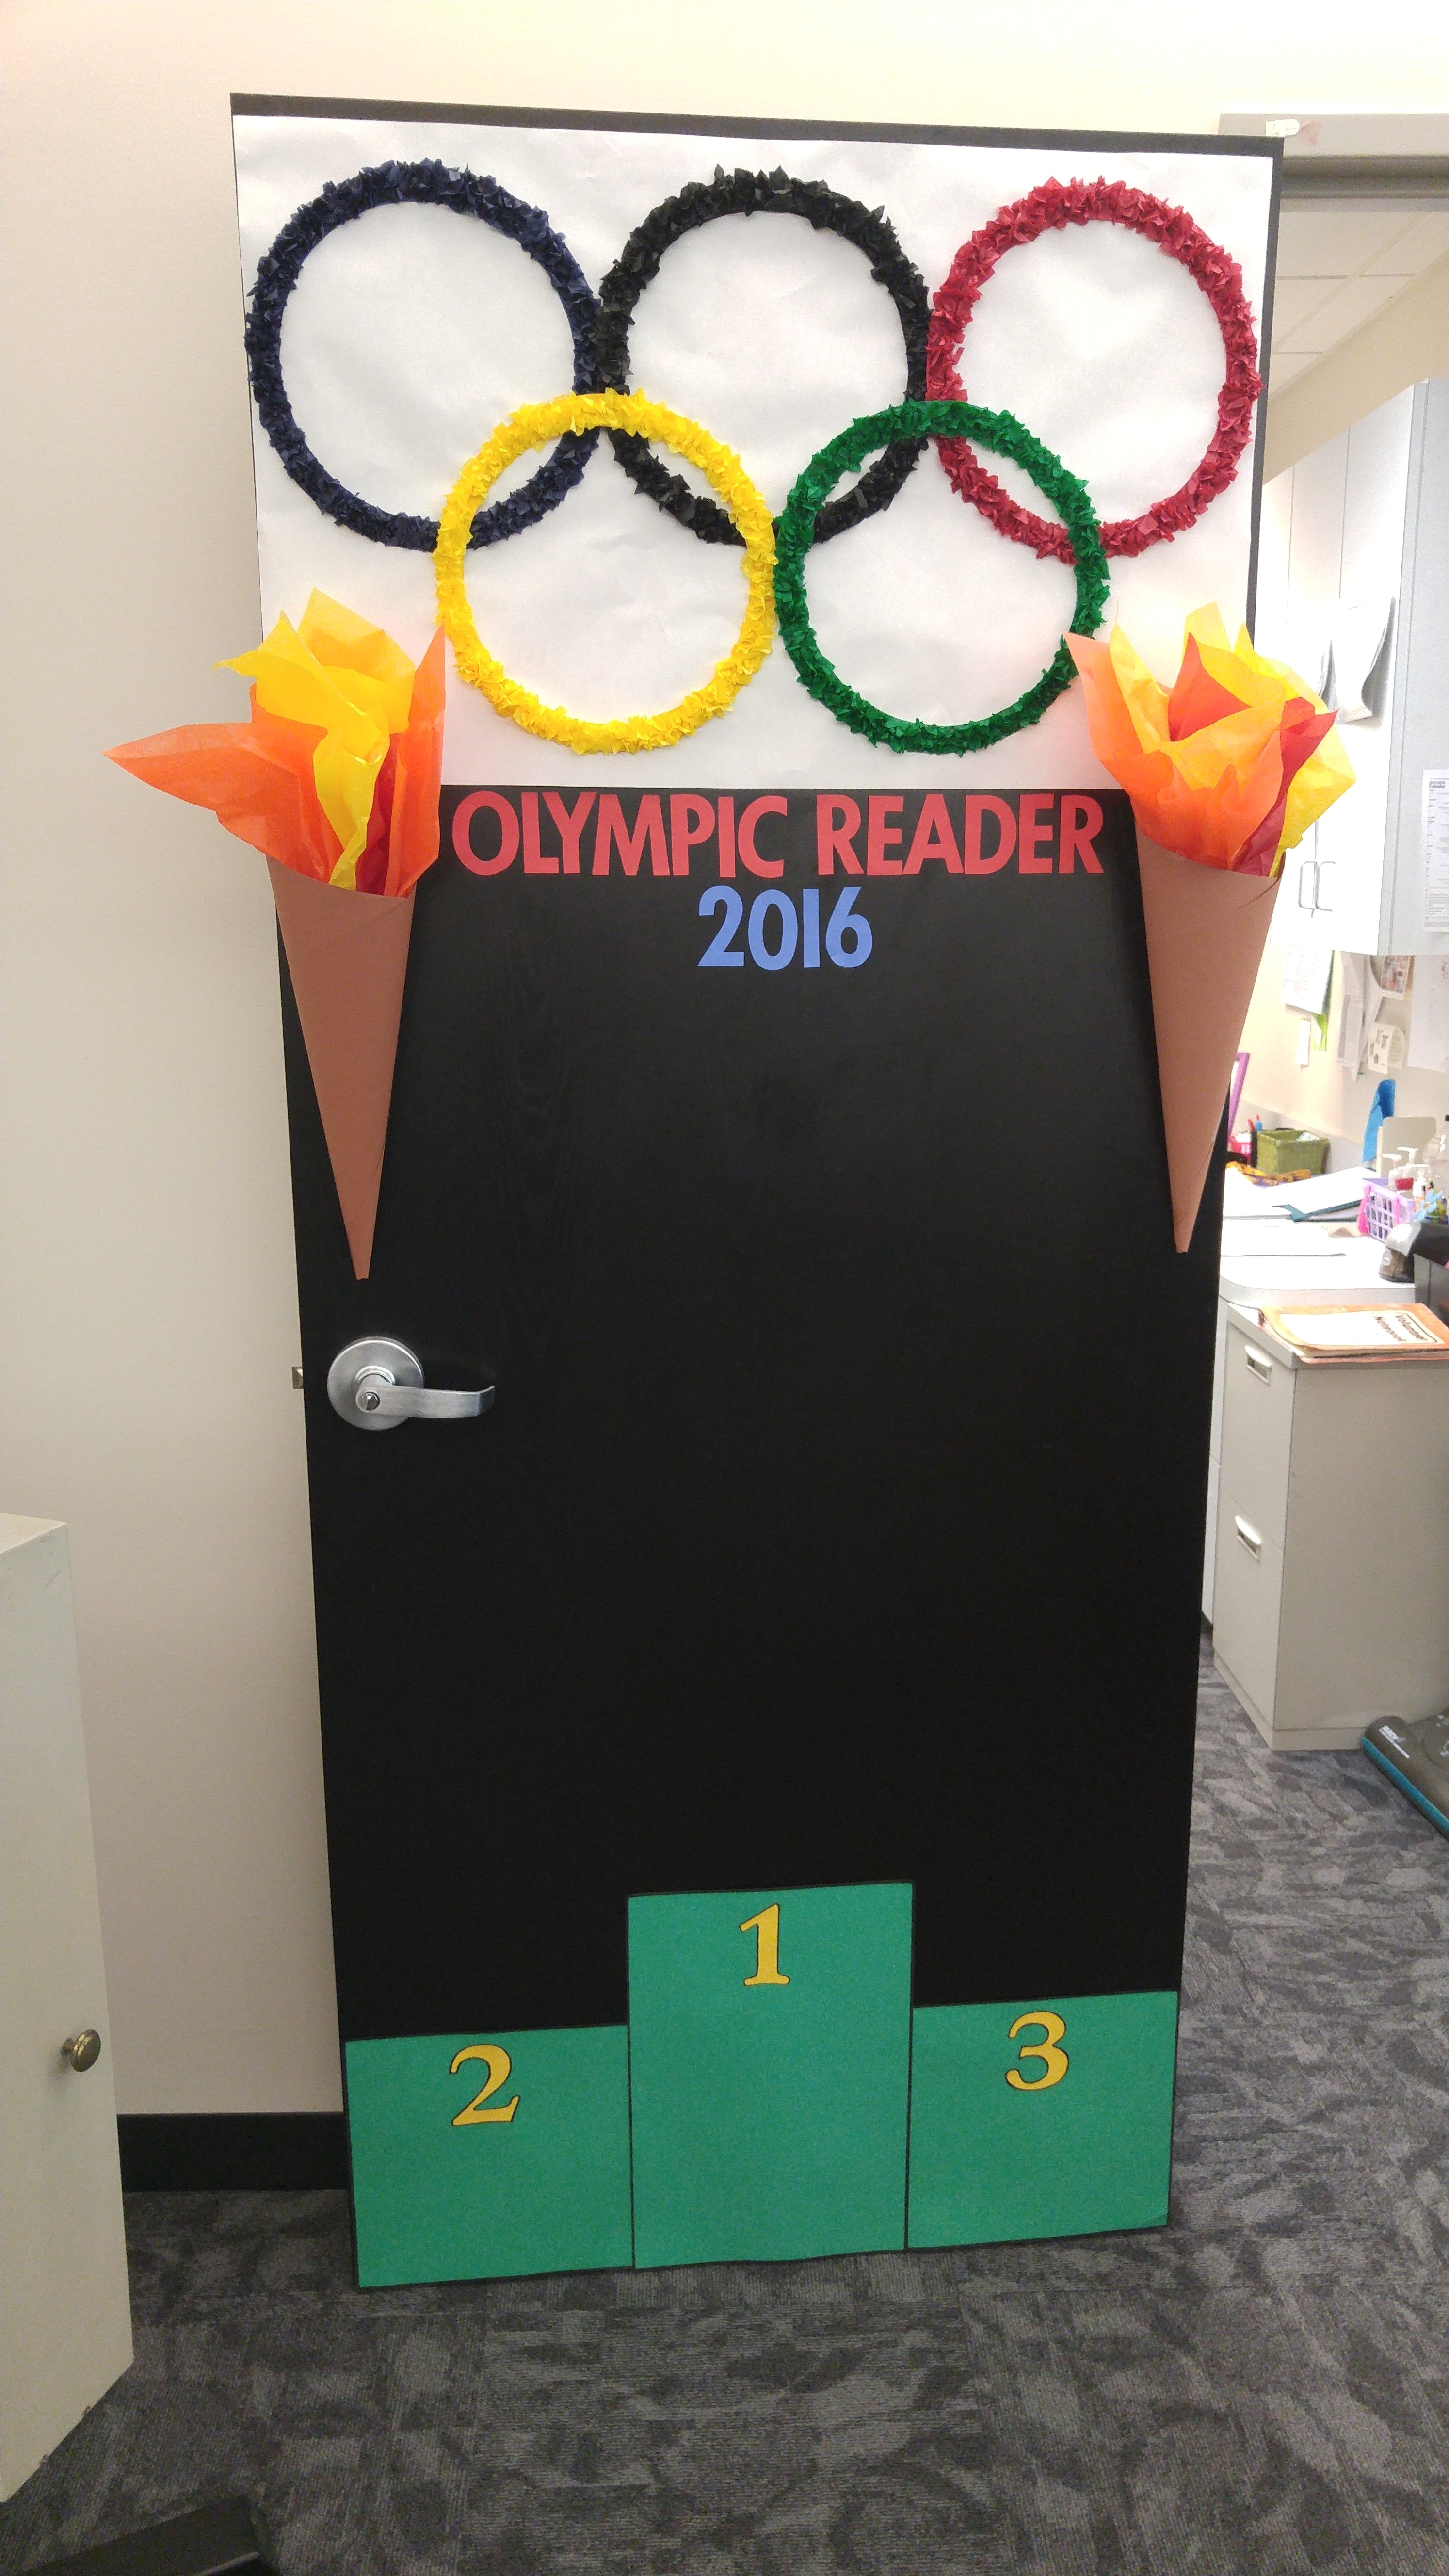 Olympic themed Classroom Decorations Olympic Readers 2016 by Susan Chada Olympics Pinterest